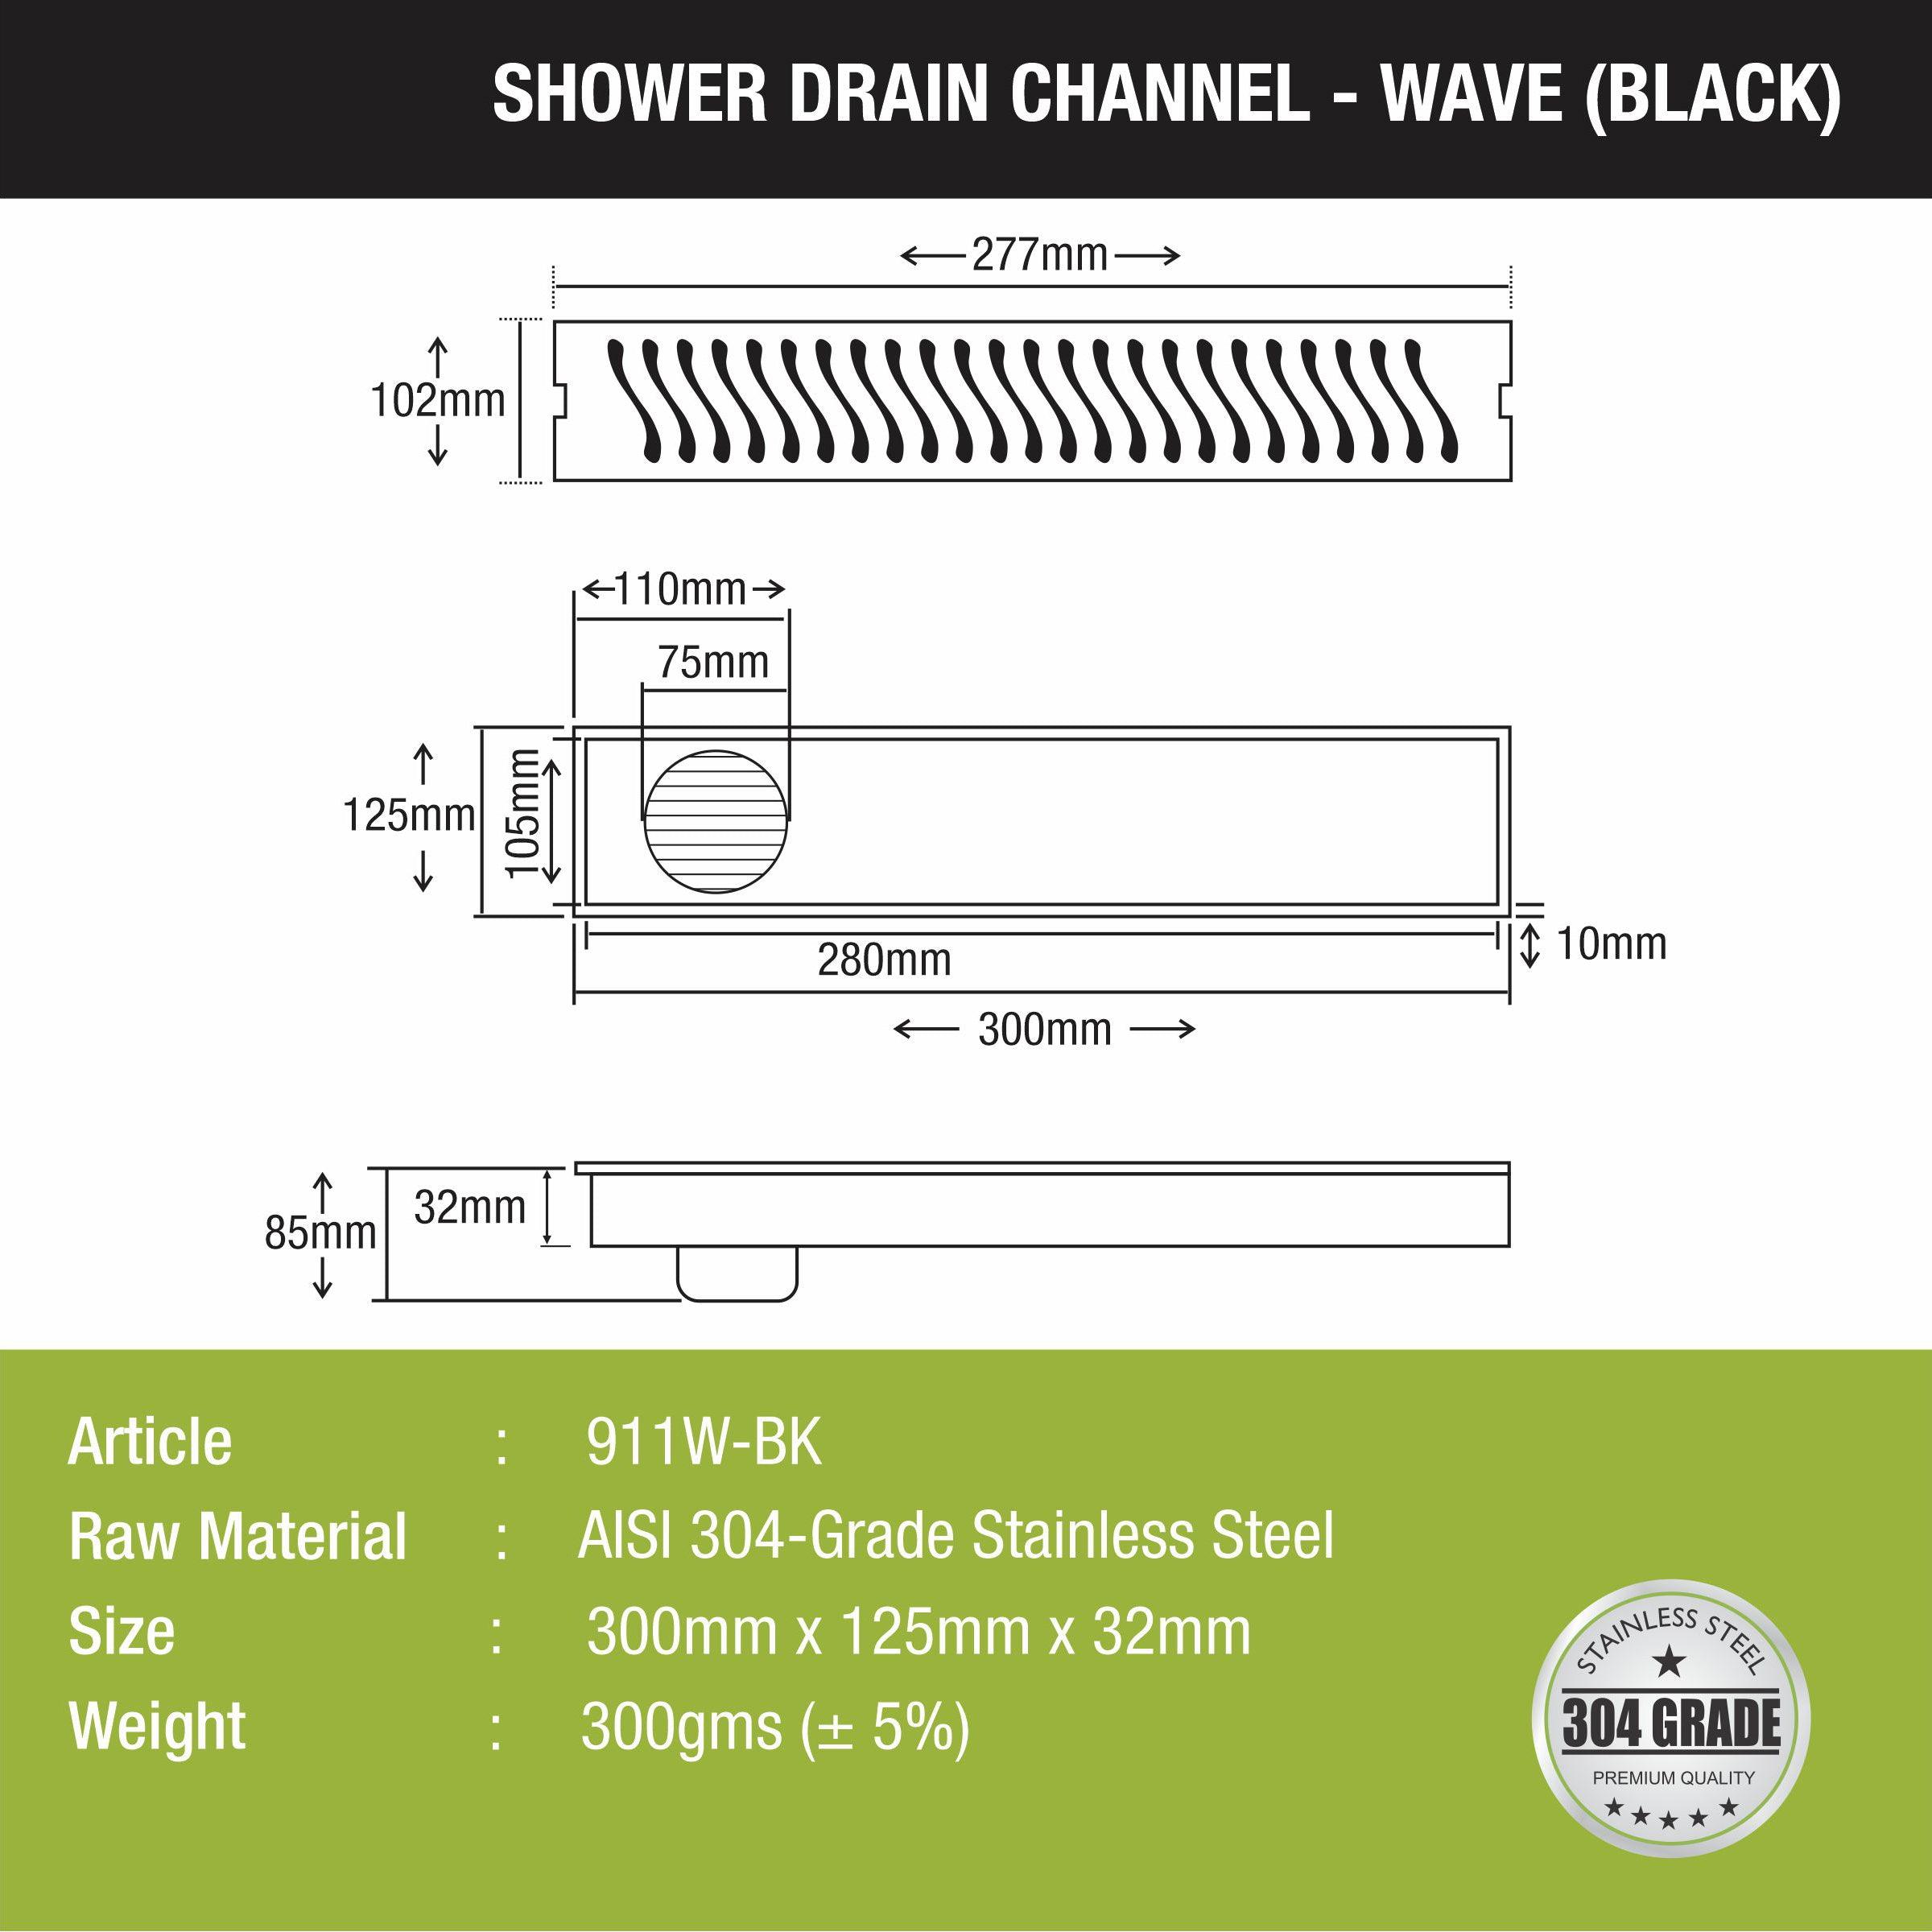 Wave Shower Drain Channel - Black (12 x 5 Inches) size and measurement